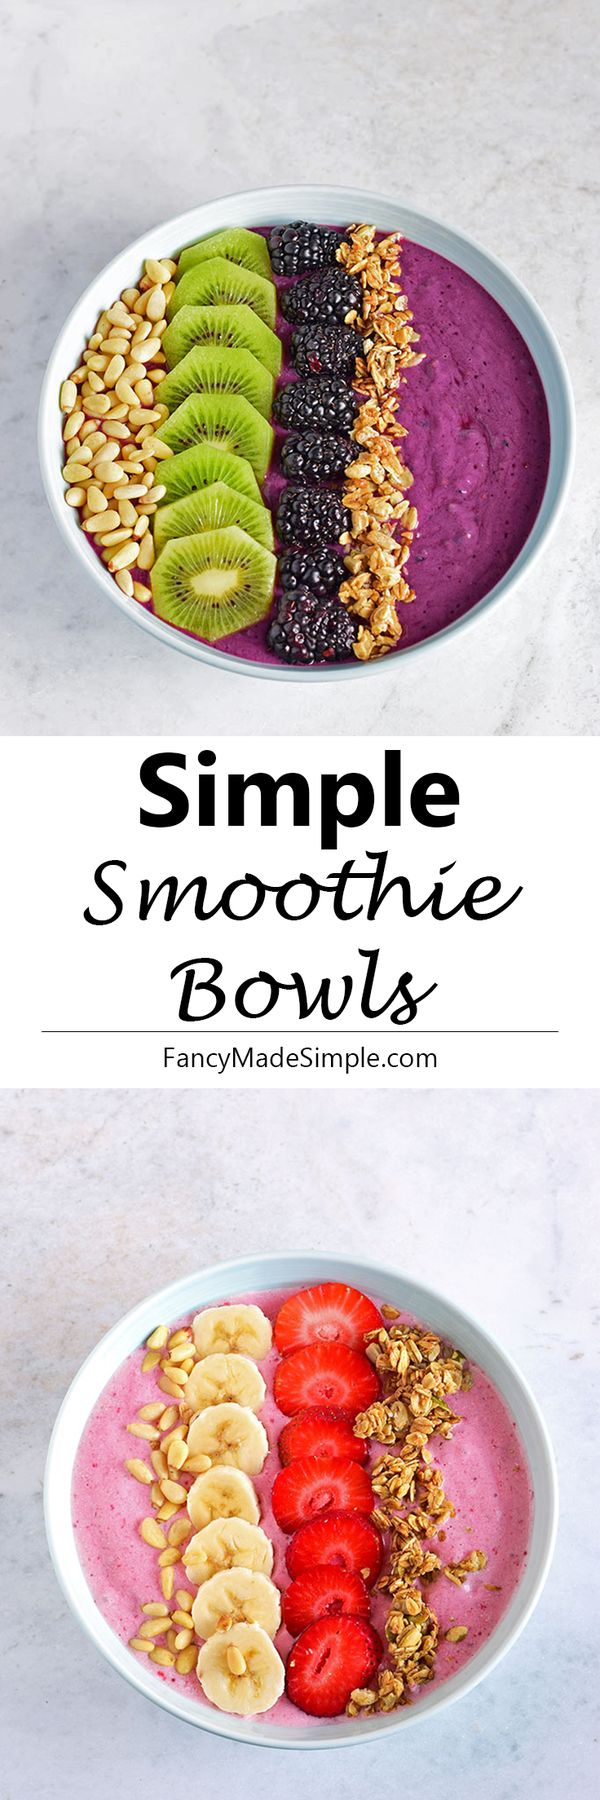 Simple Smoothie Bowls